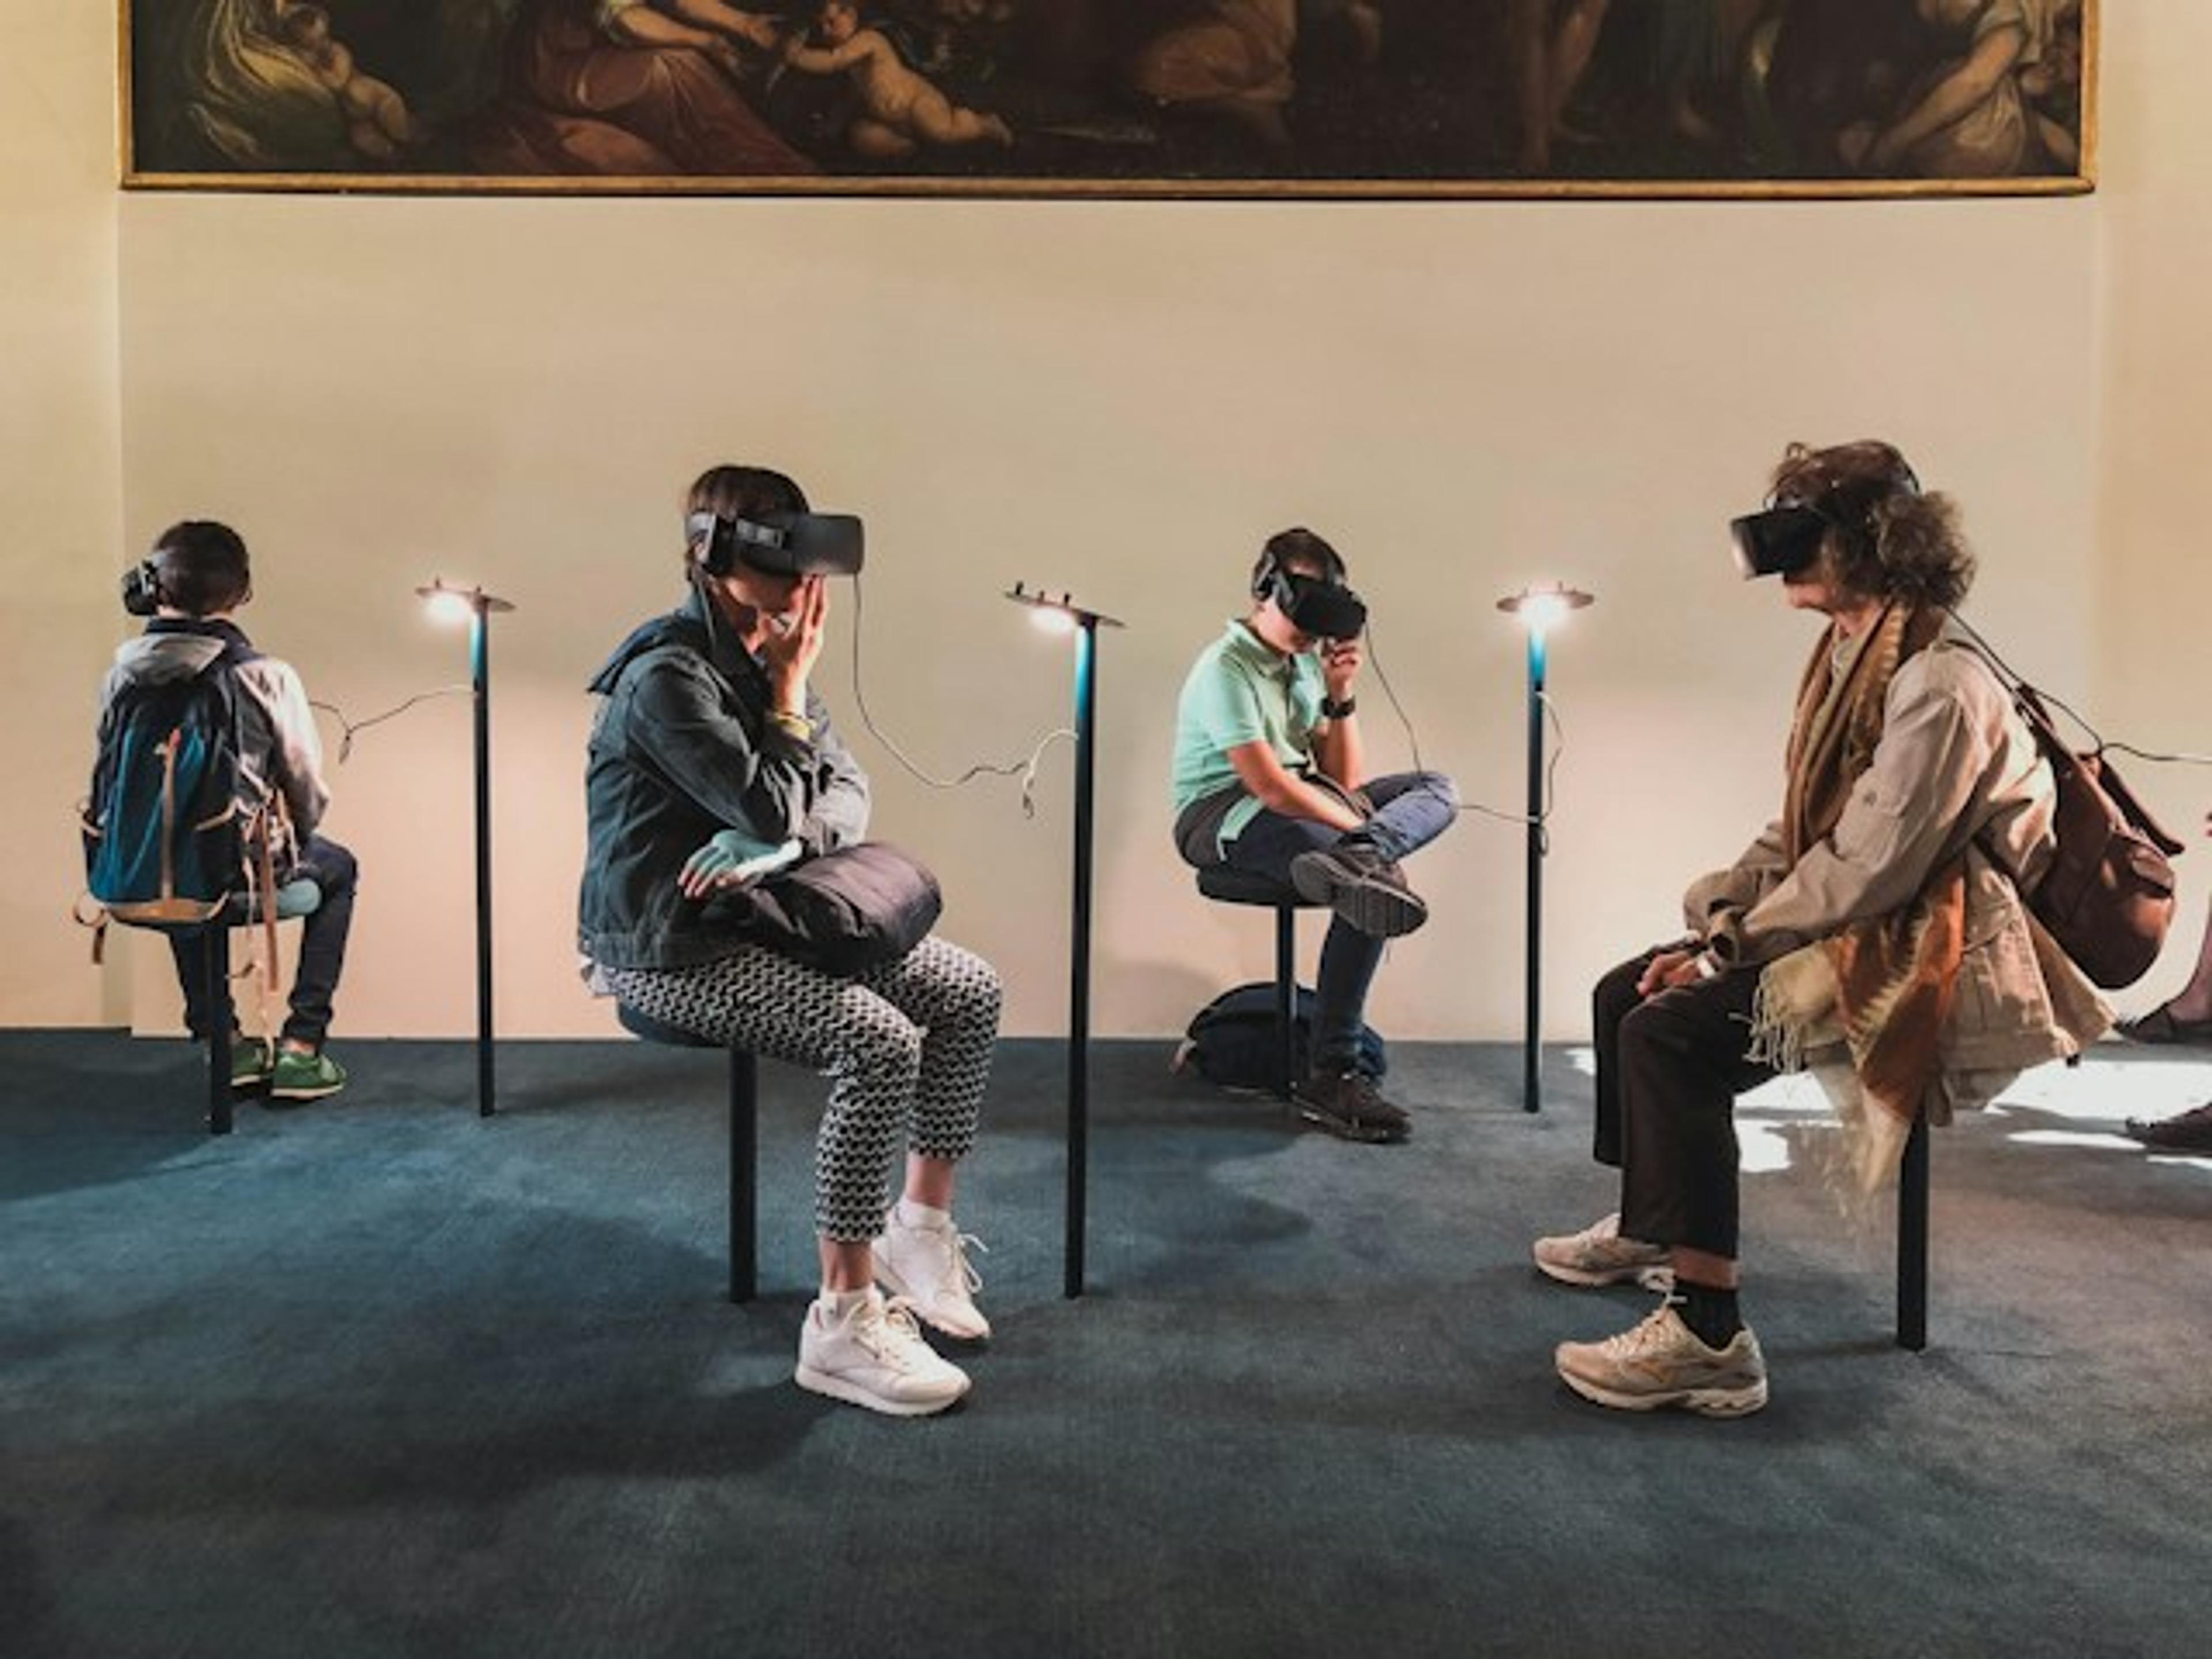 People sitting and wearing VR headsets in a room.